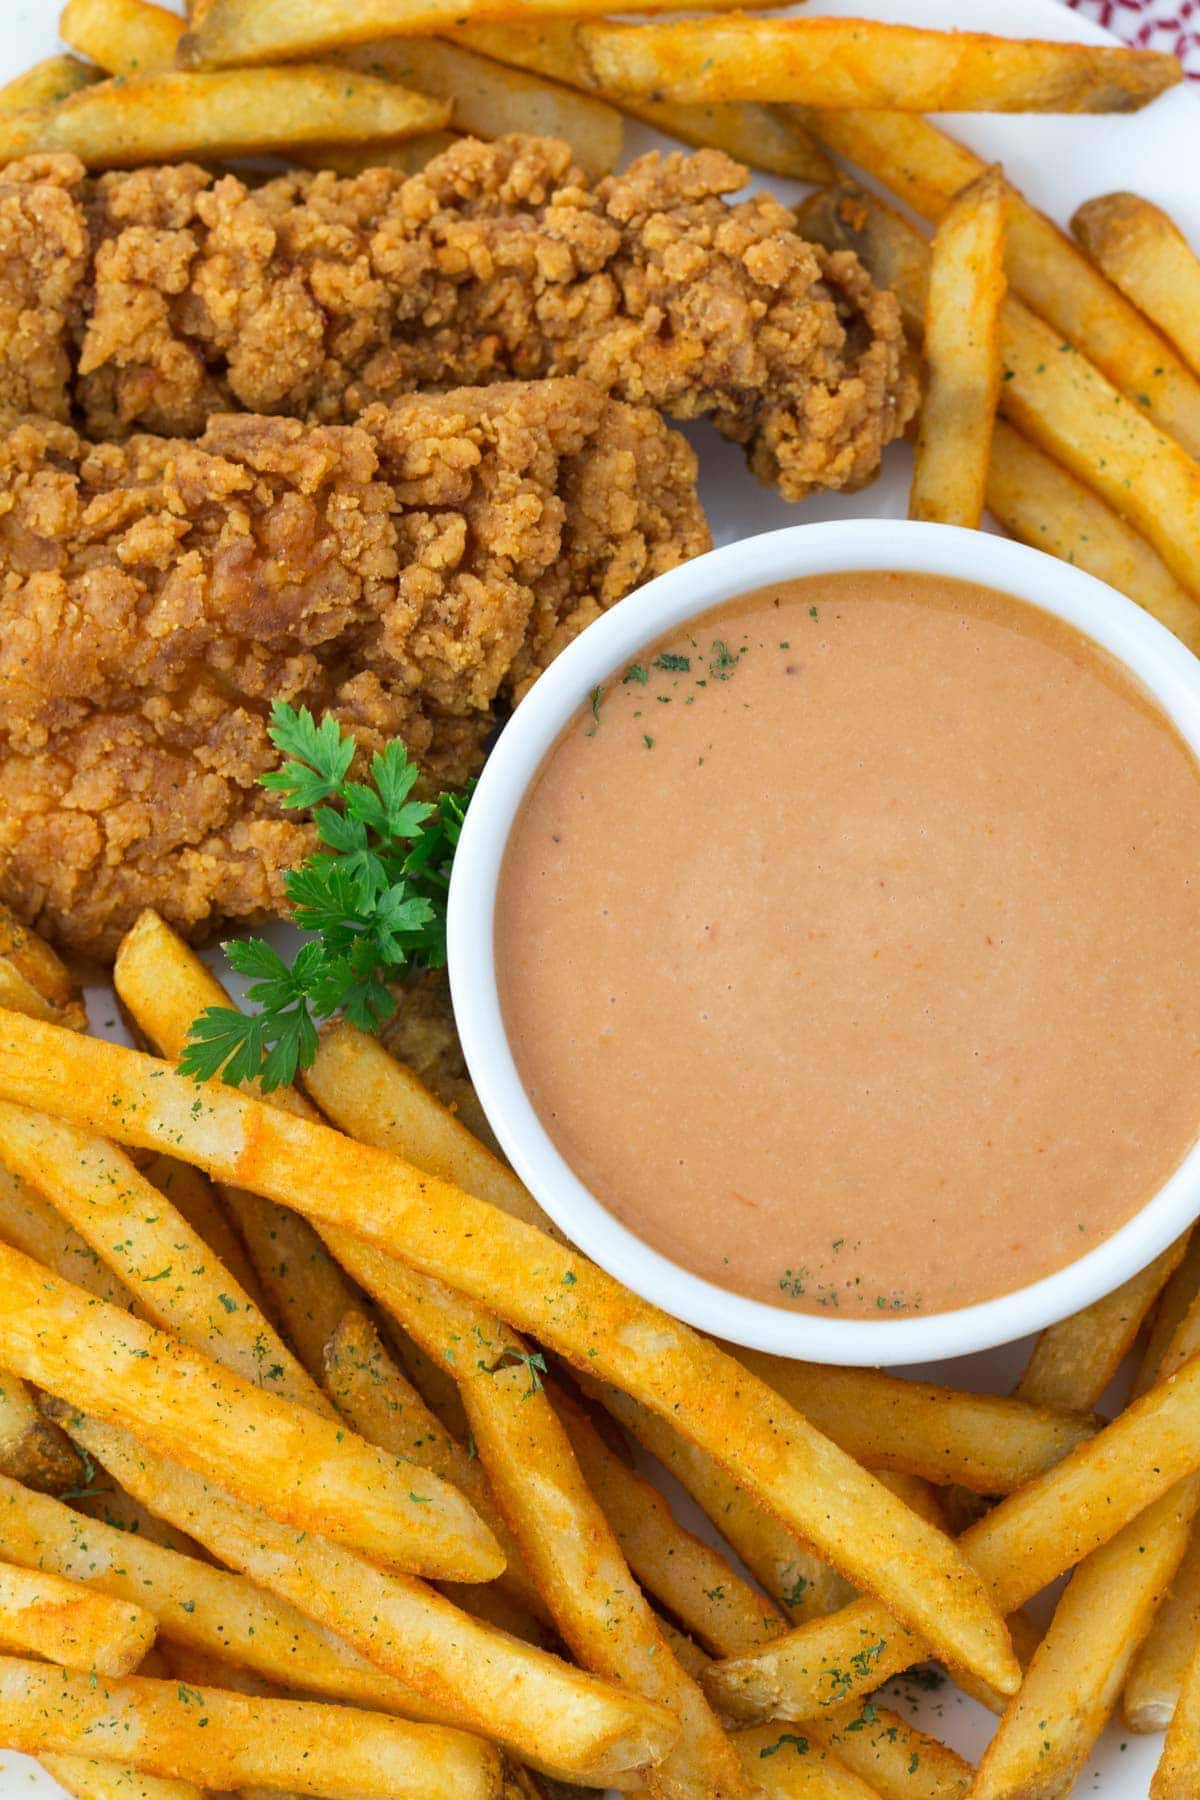 Overhead view of platter of french fries and bowl of Red Robin campfire sauce.